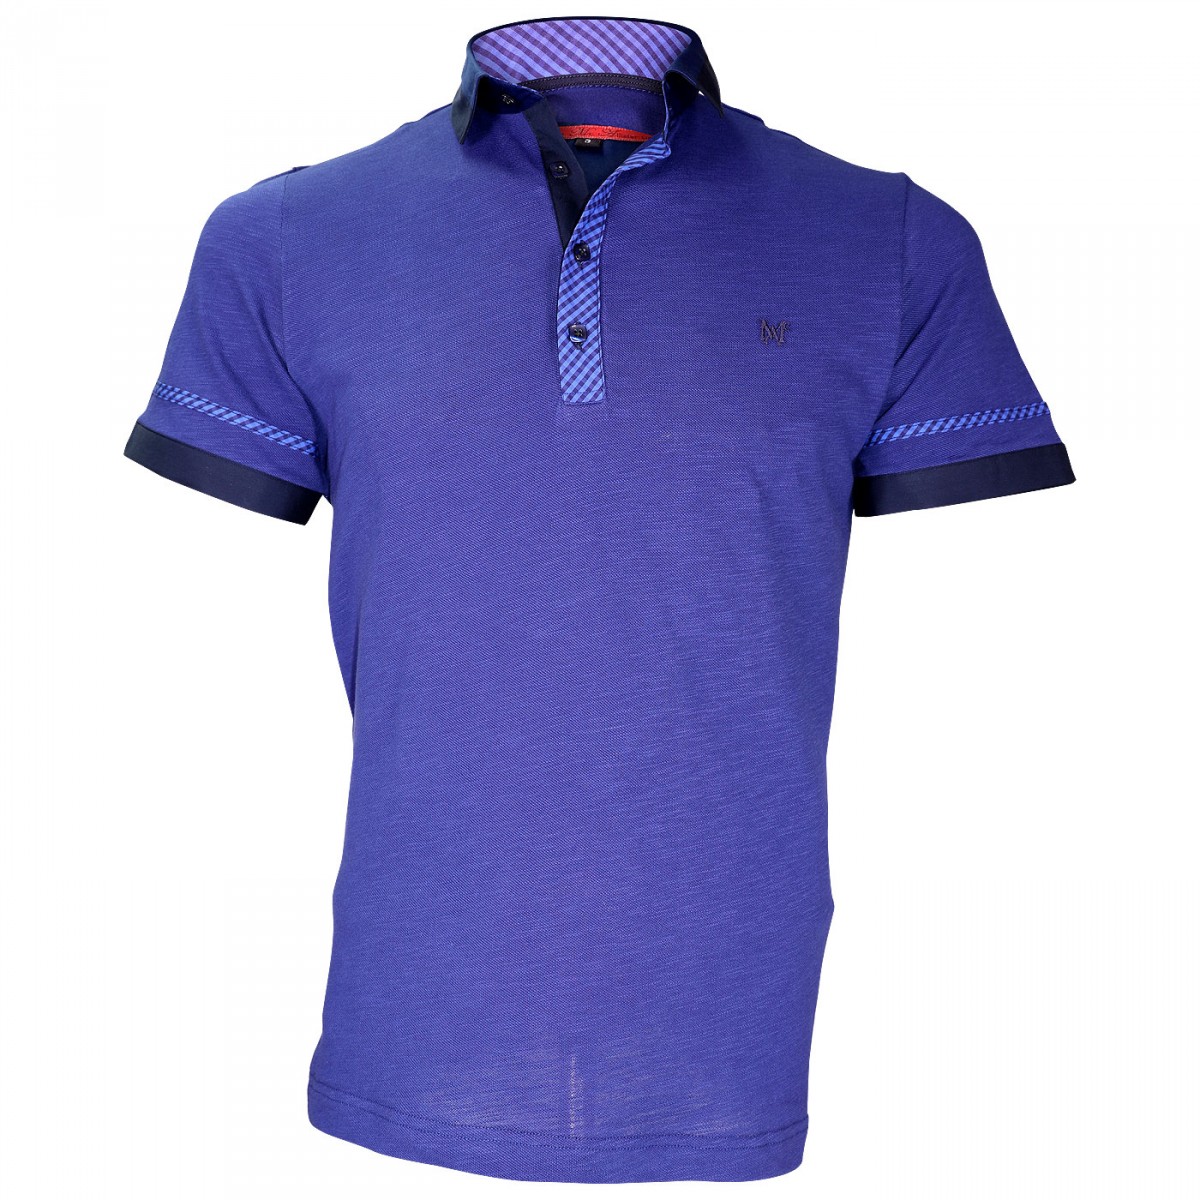 polo shirts material